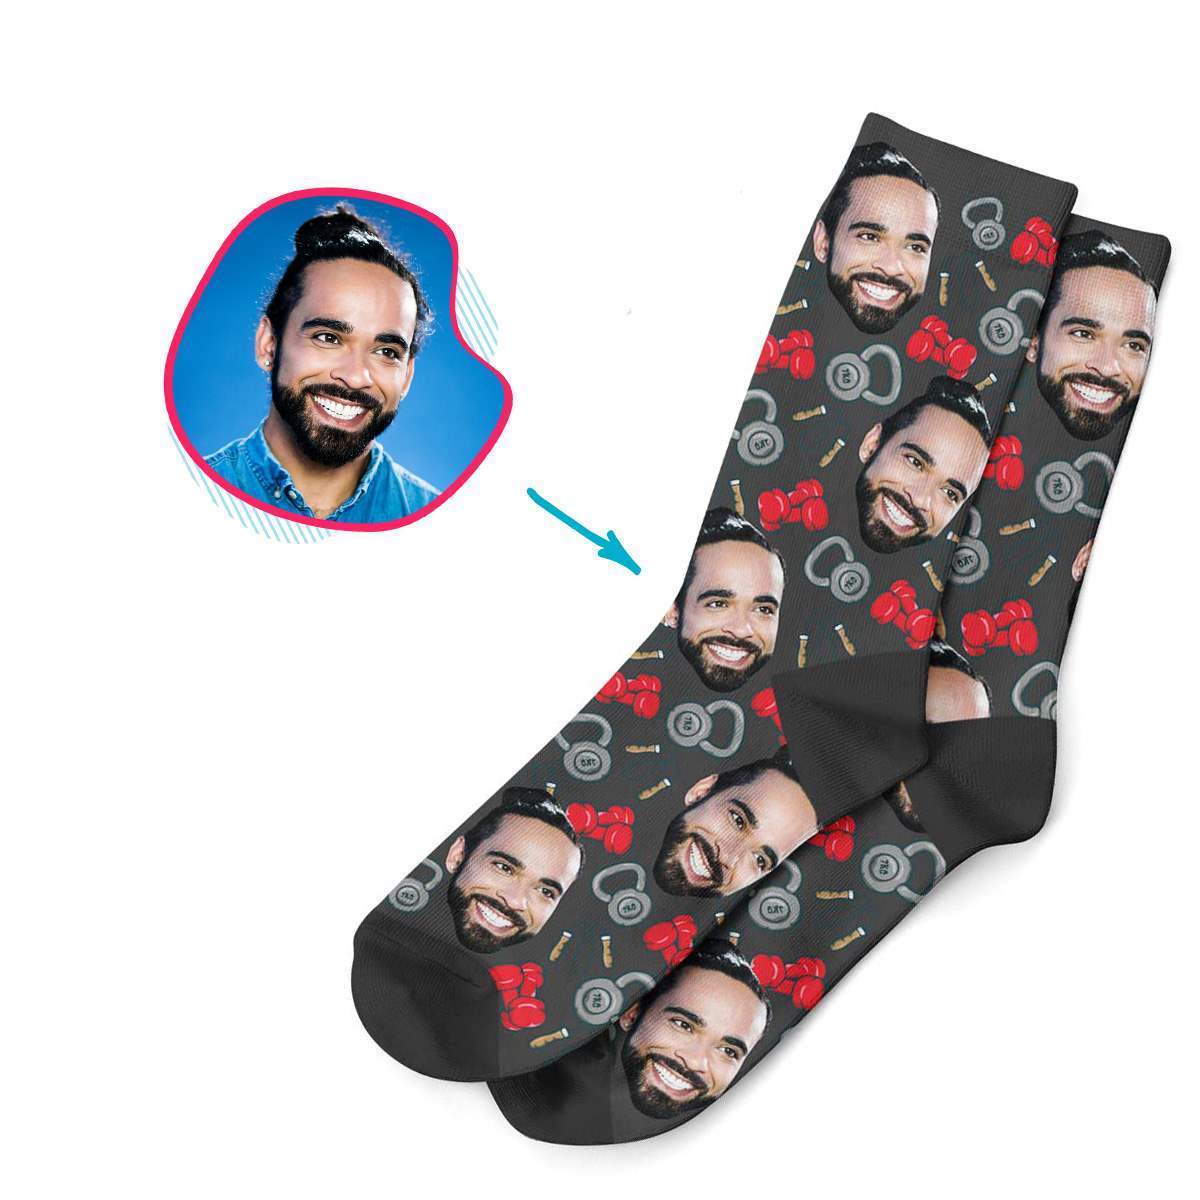 dark Gym & Fitness socks personalized with photo of face printed on them